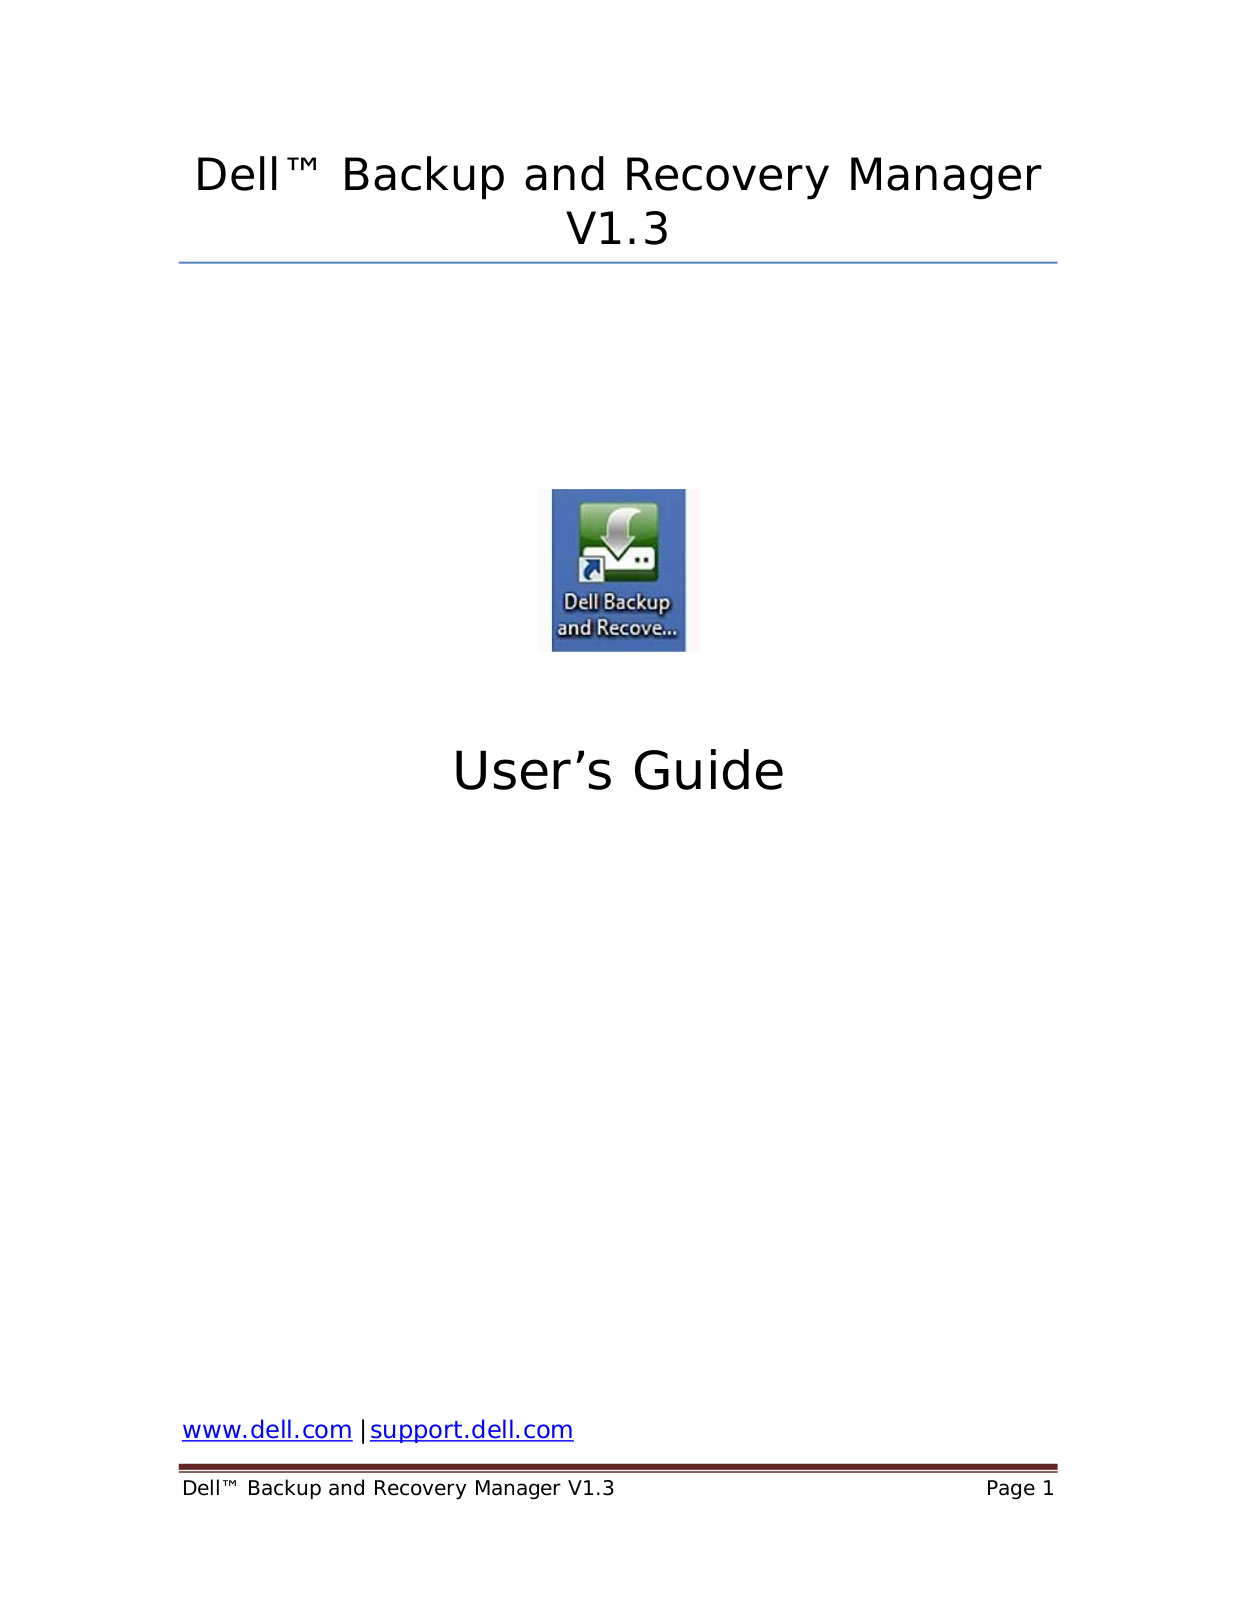 Dell Backup and Recovery Manager User Manual